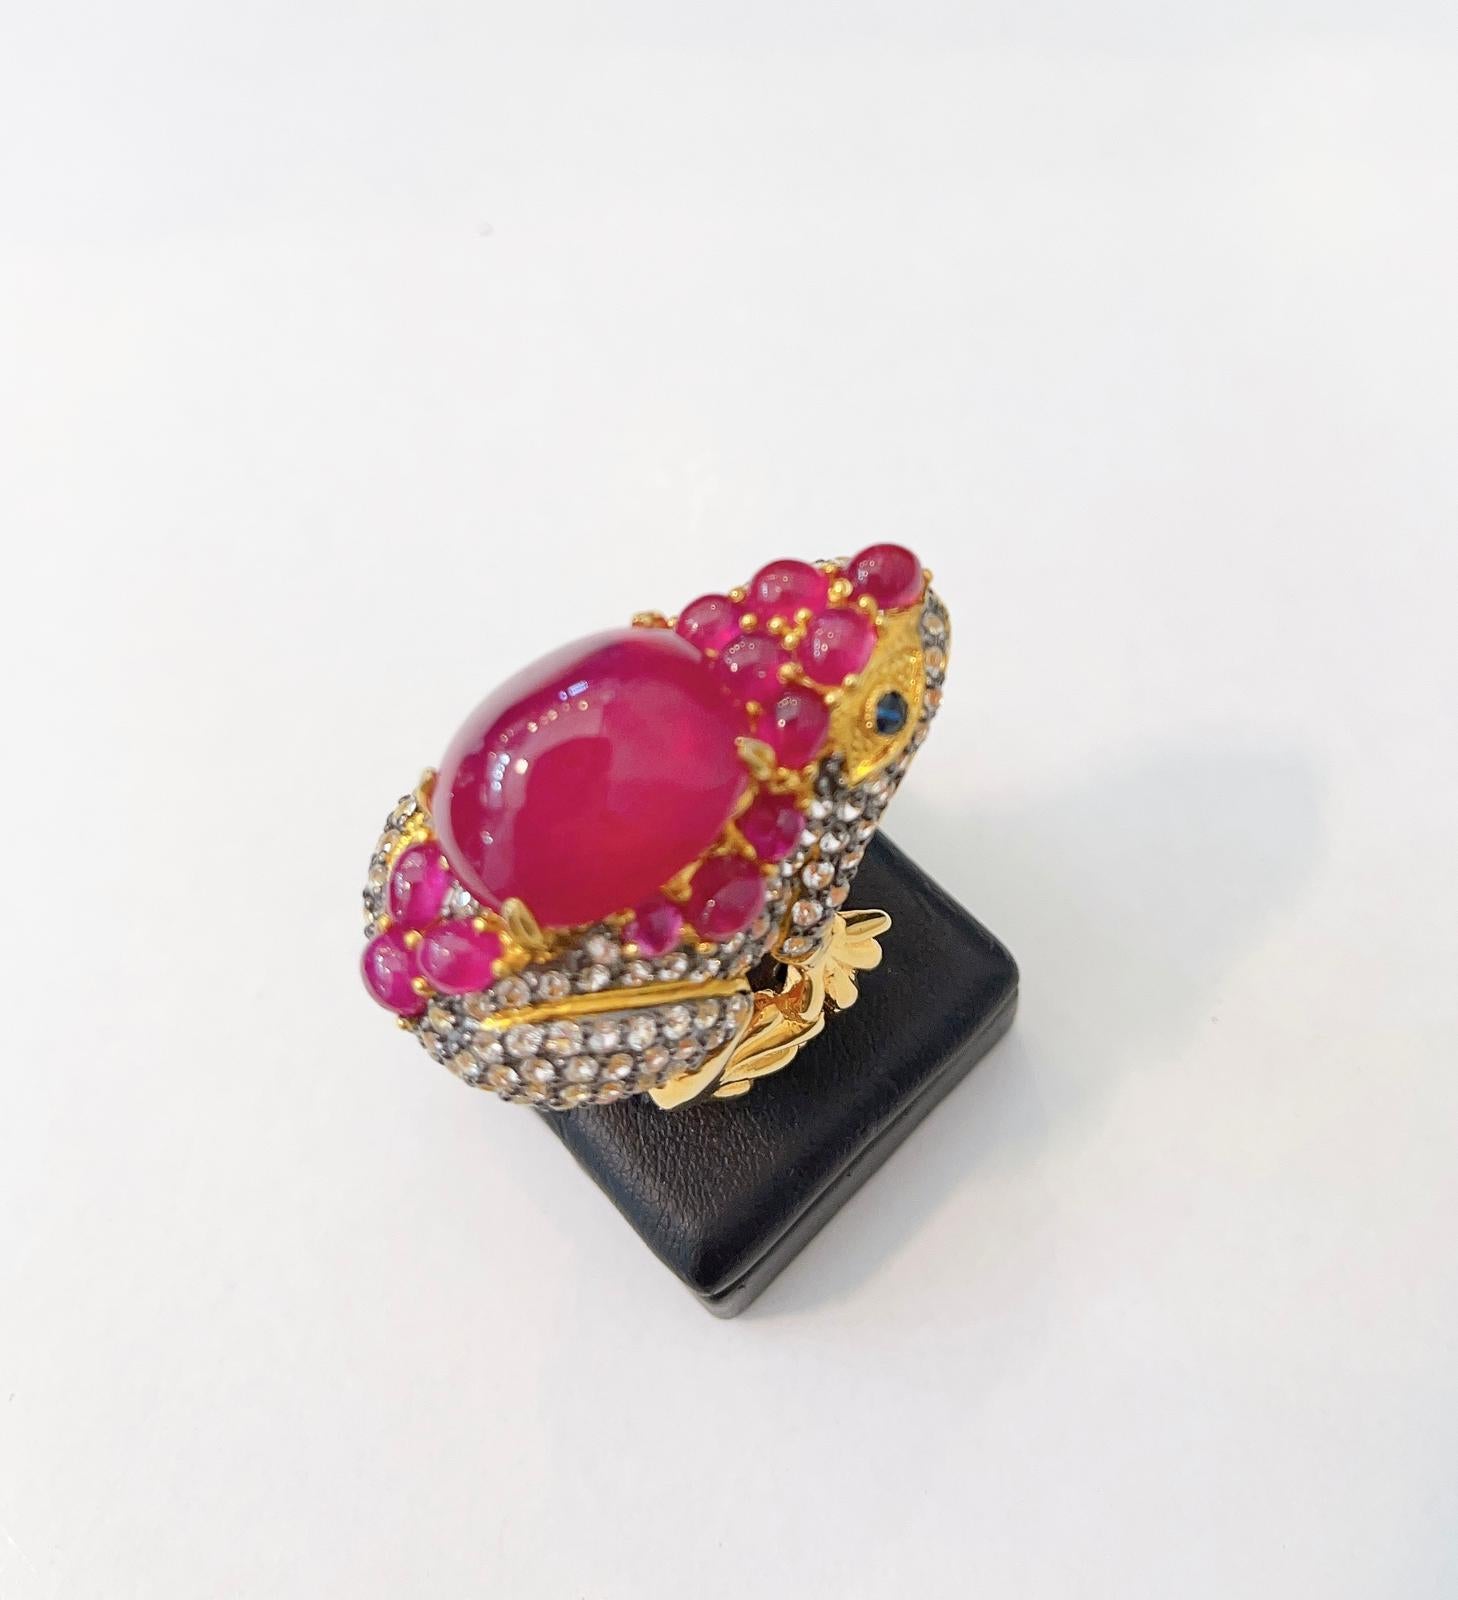 “Orient” Red Ruby & White Topaz Cocktail Ring Set in 22k Gold & Silver For Sale 6